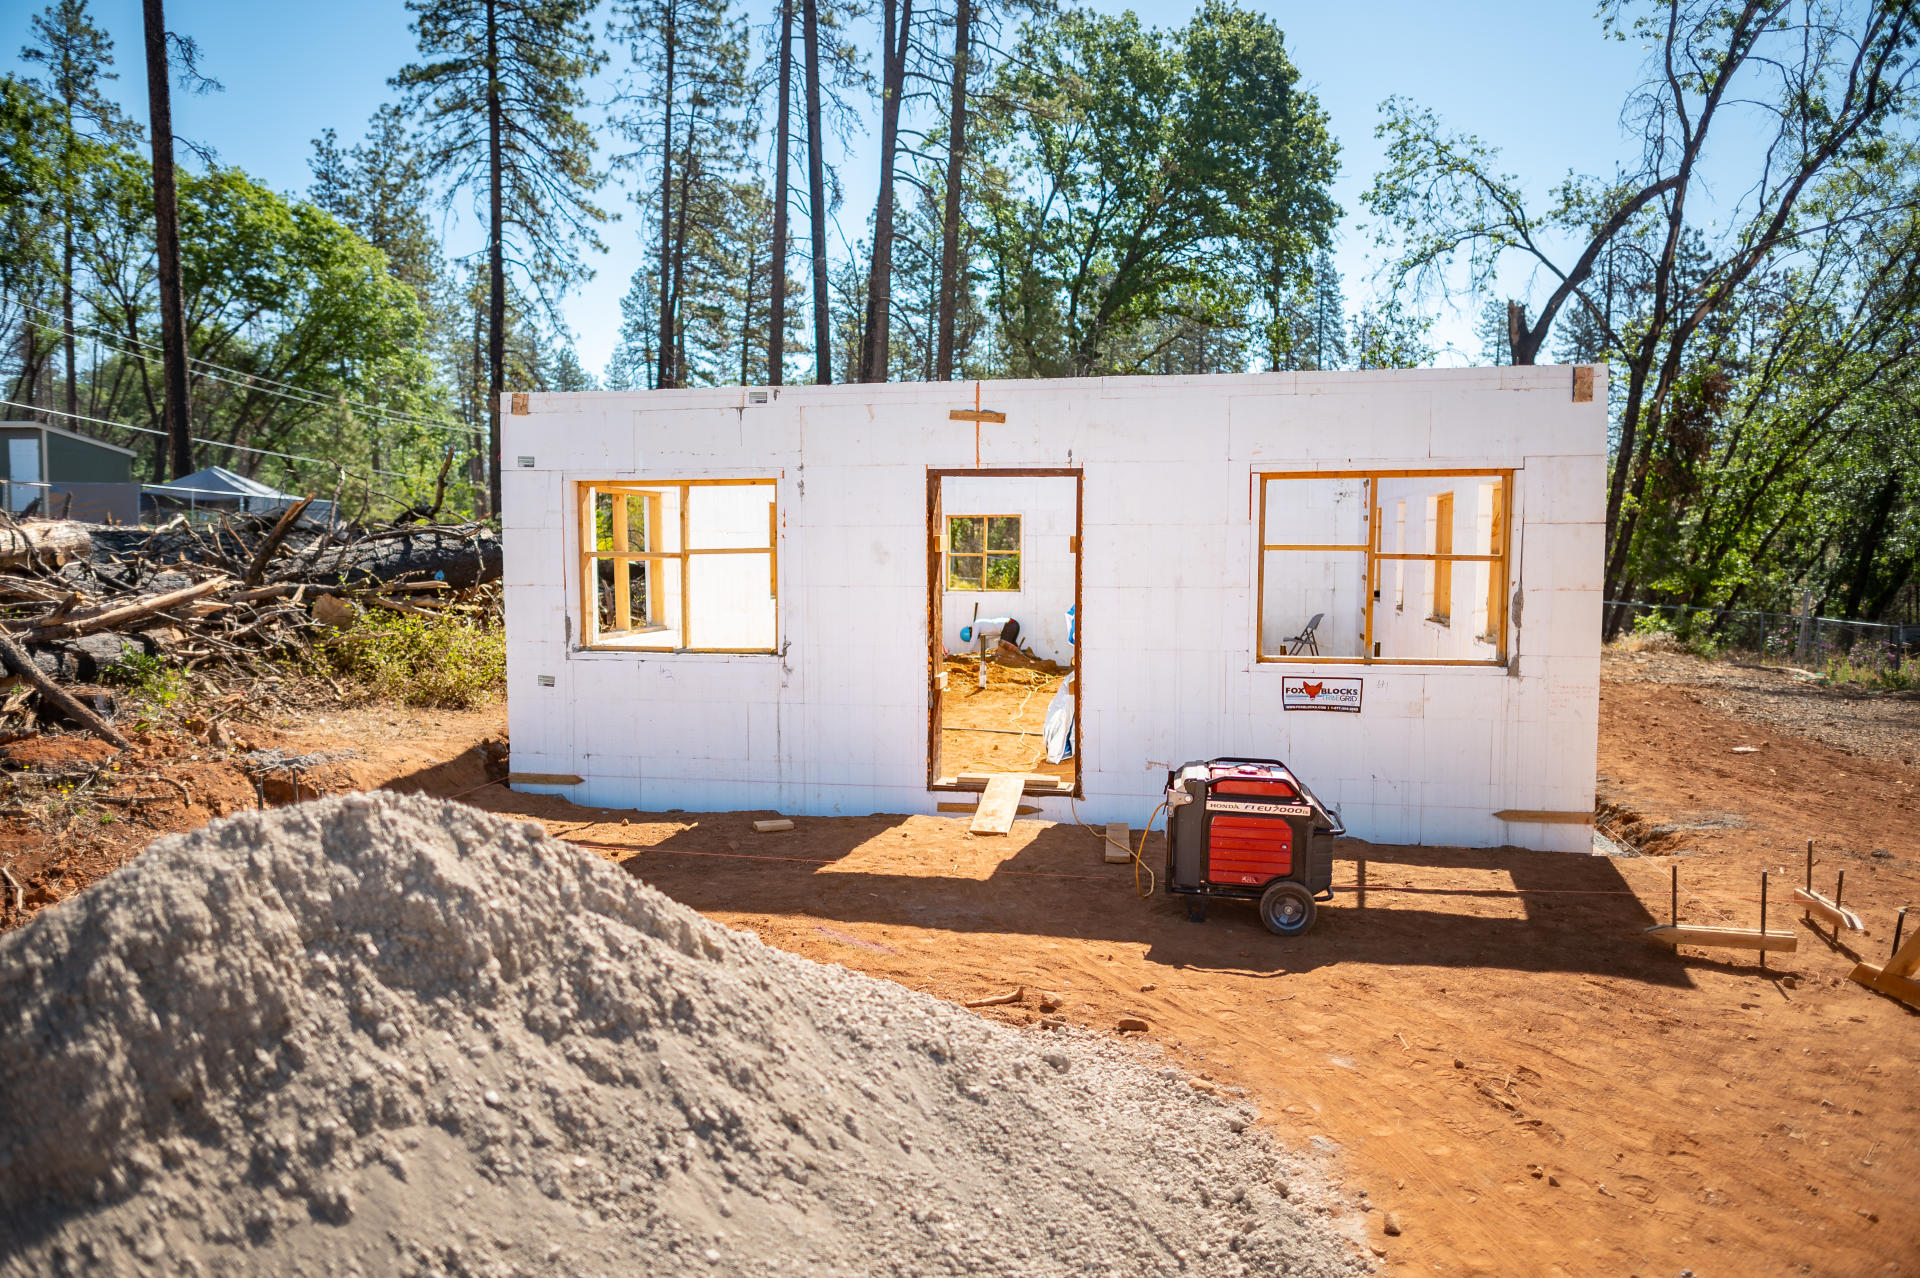 A new home starts to take shape using insulated concrete forms but still lacks a window, doors, and a roof.